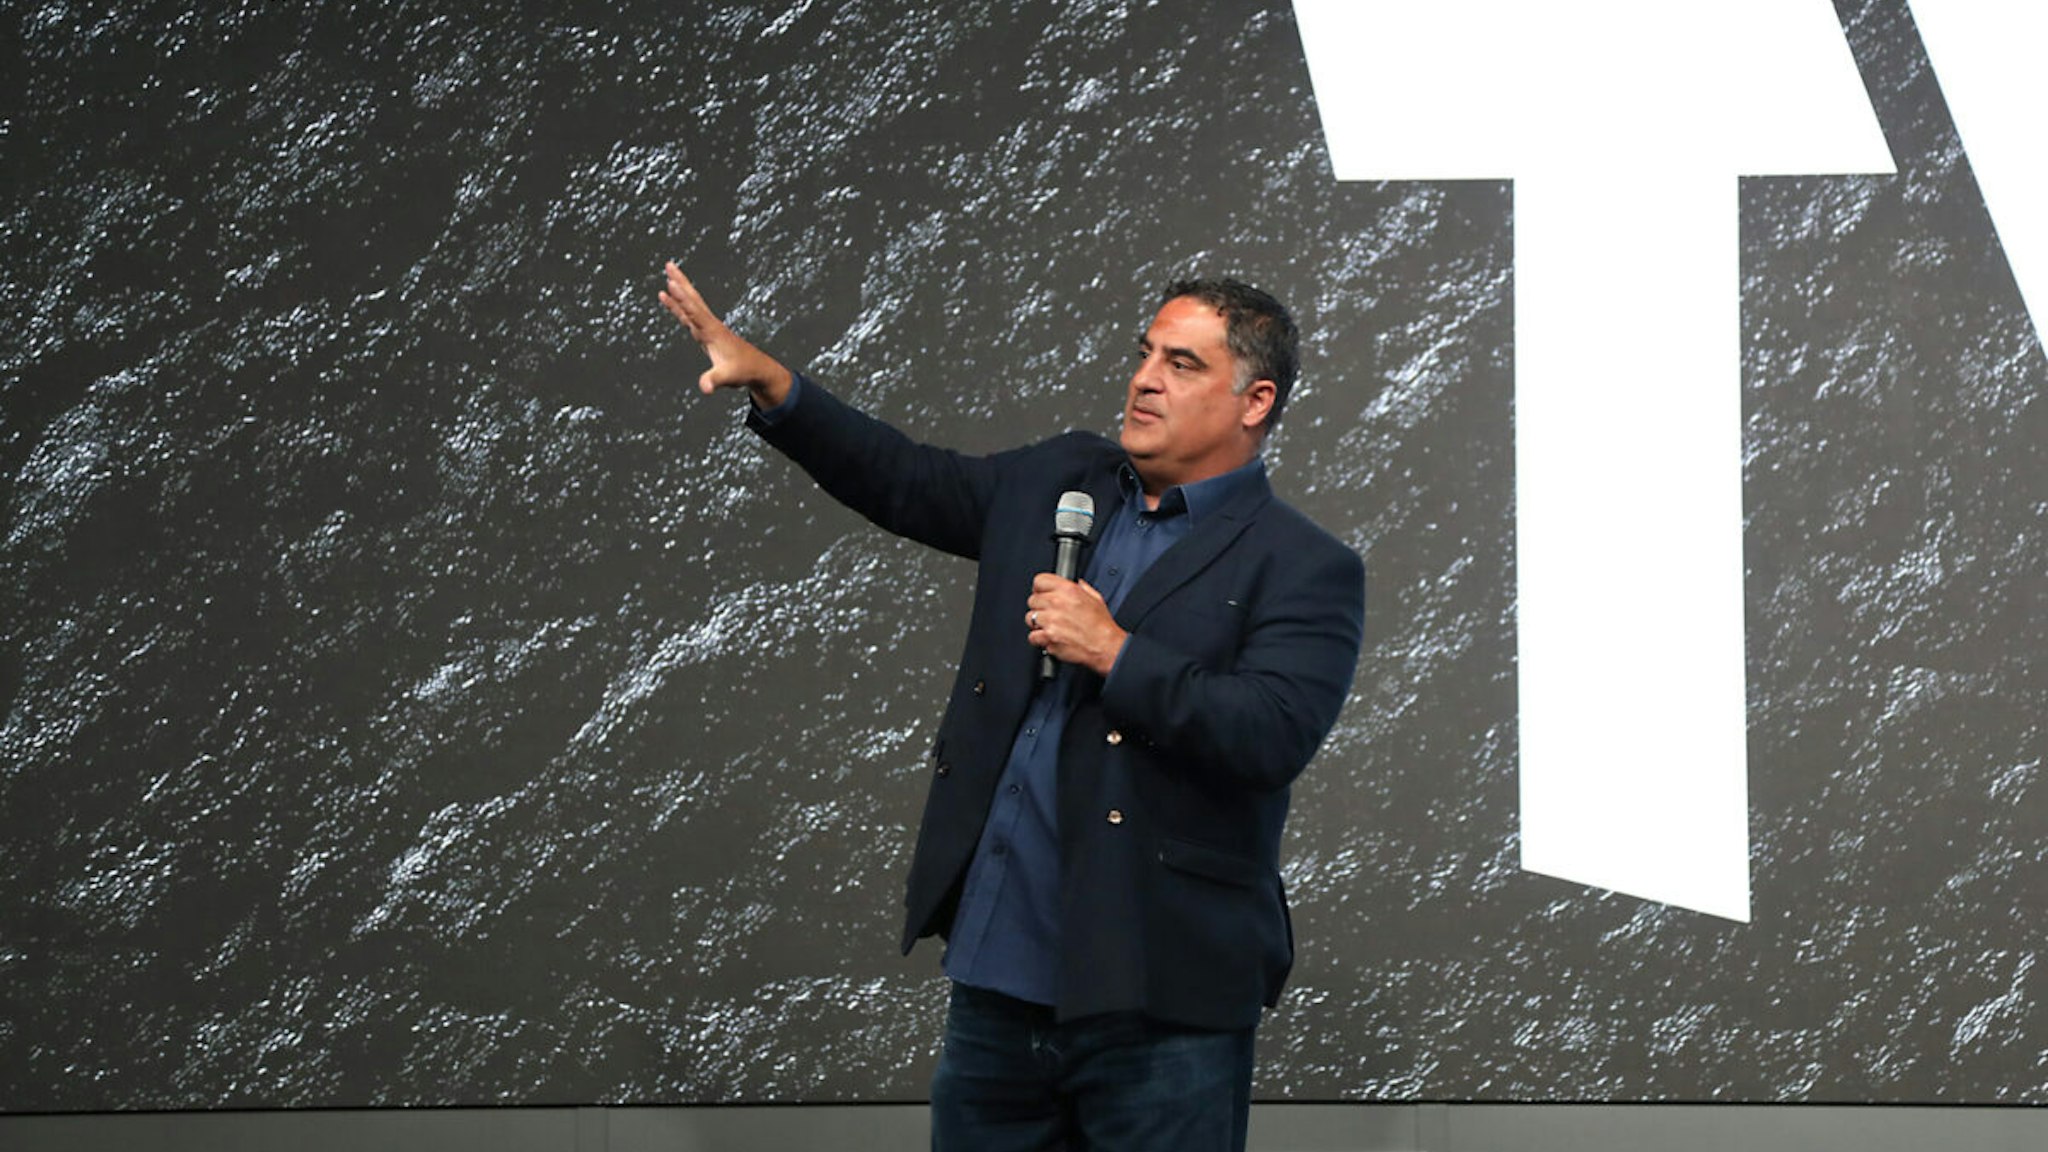 Cenk Uygur, Founder and CEO of TYT attends The Young Turks (TYT) 20th Anniversary Celebration at YouTube Space LA on May 25, 2022 in Los Angeles, California.